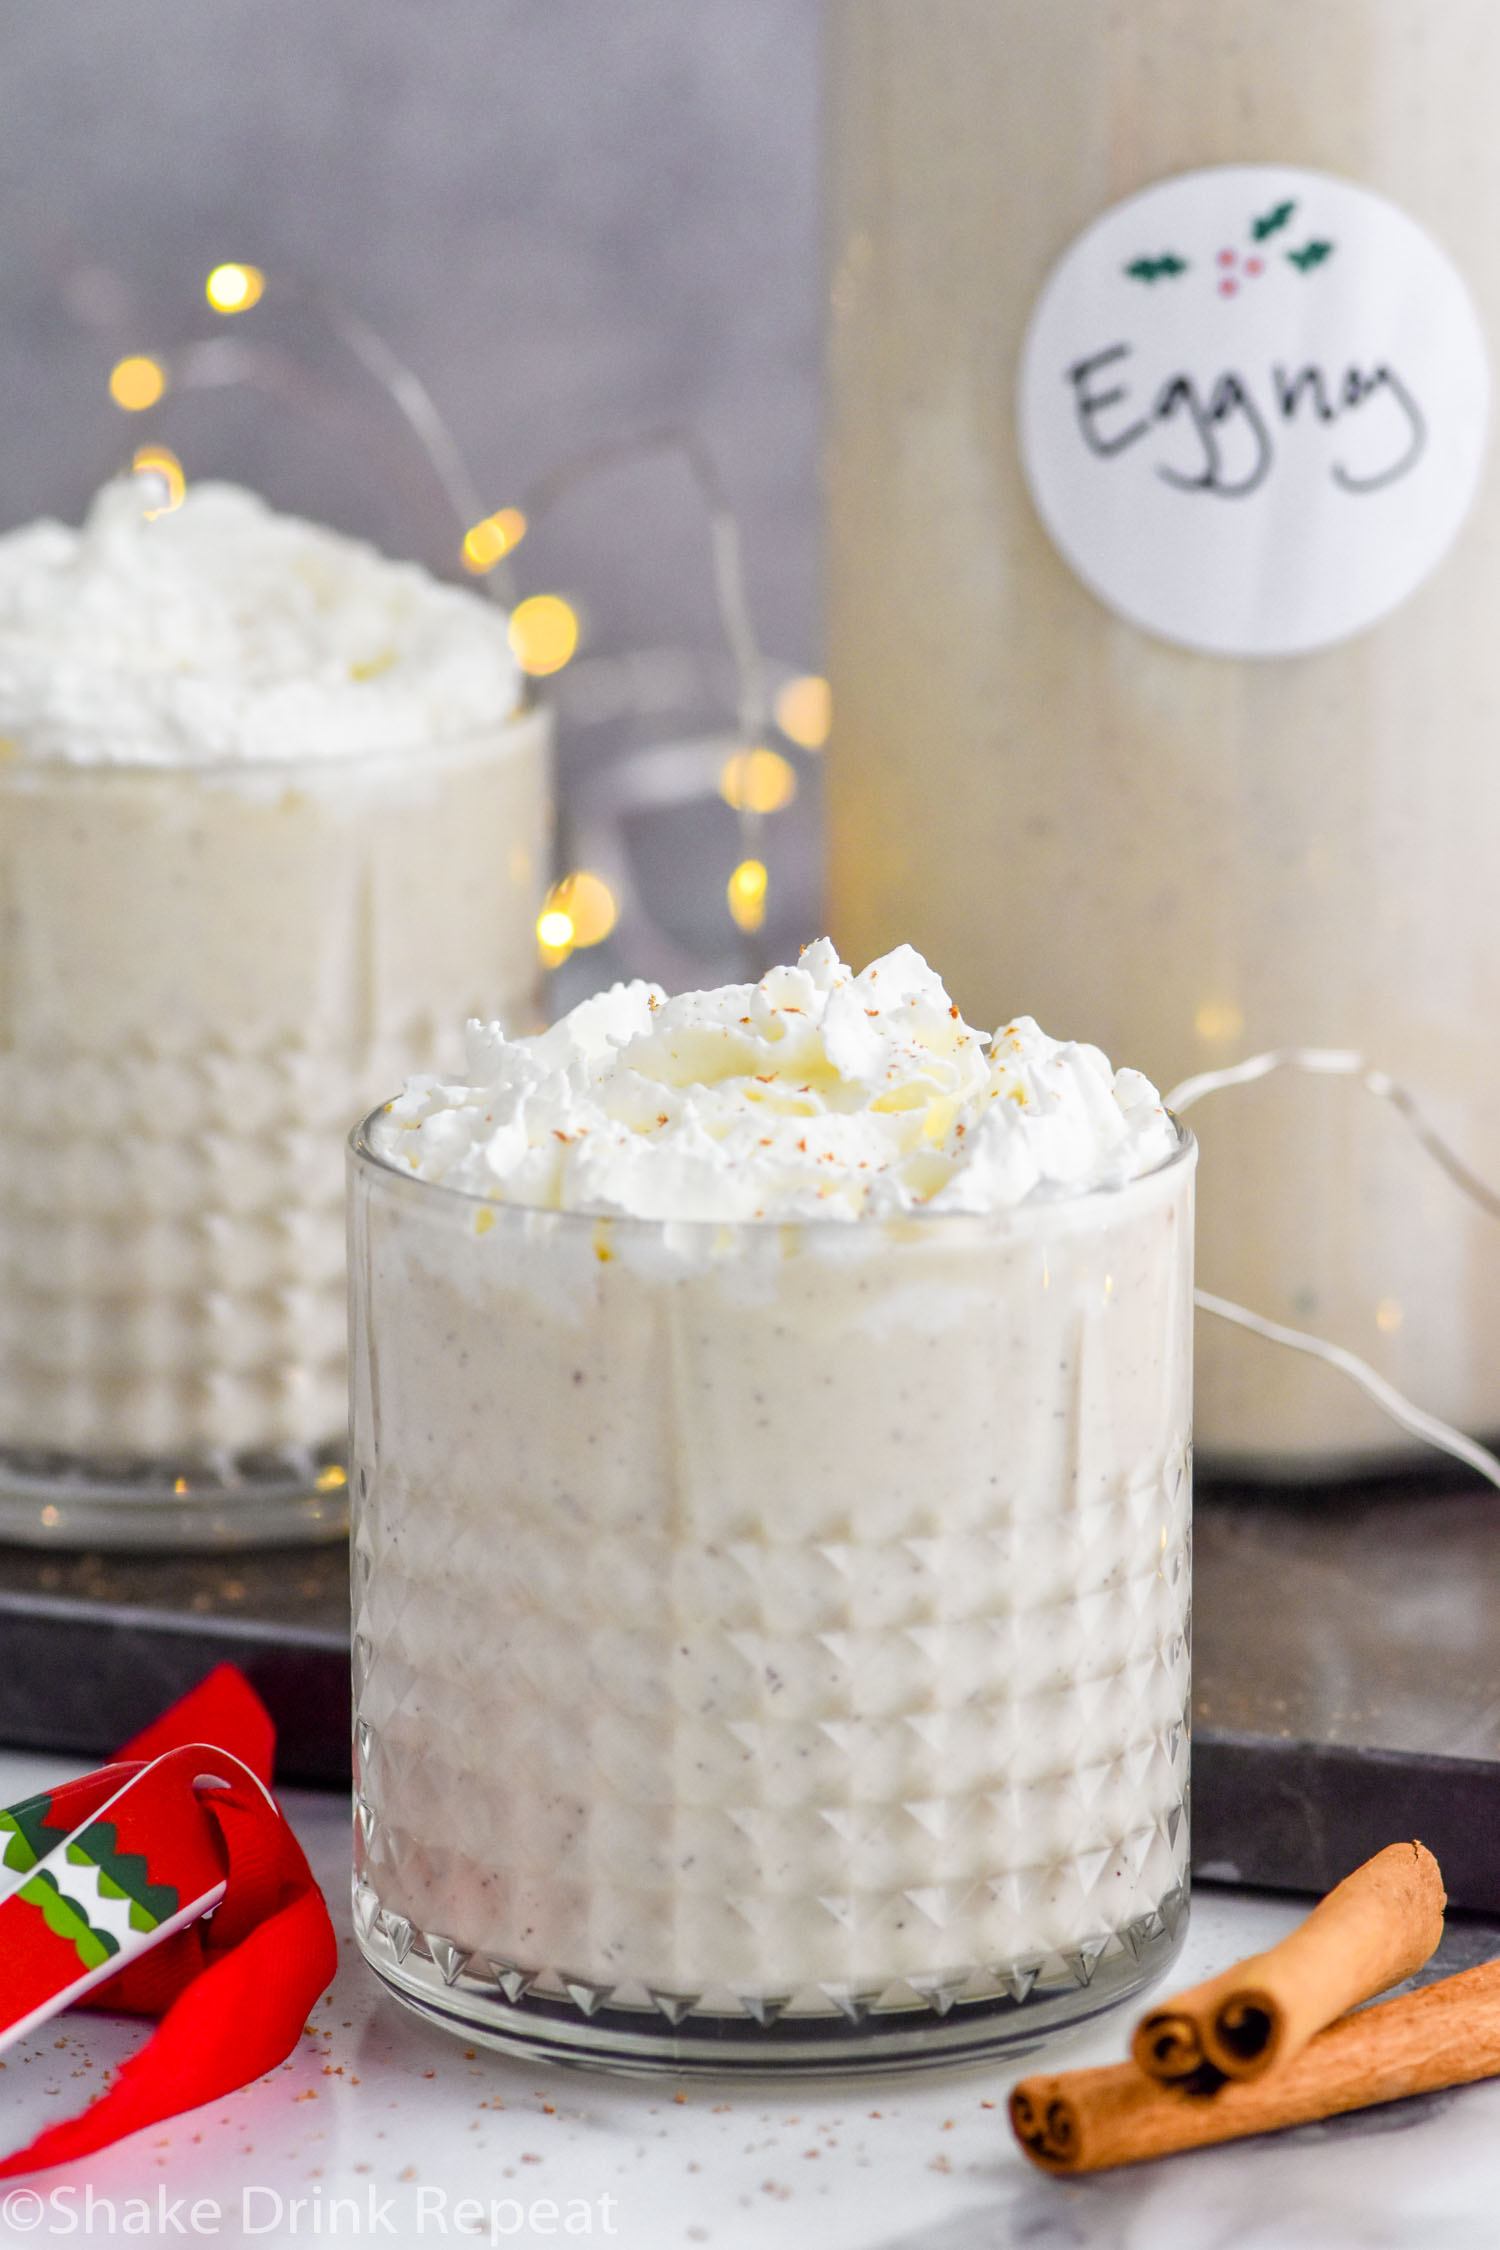 Front facing photo of Spiked Eggnog with a second glass of eggnog to the back left and a bottle of eggnog to the back right with sparkling lights behind it.